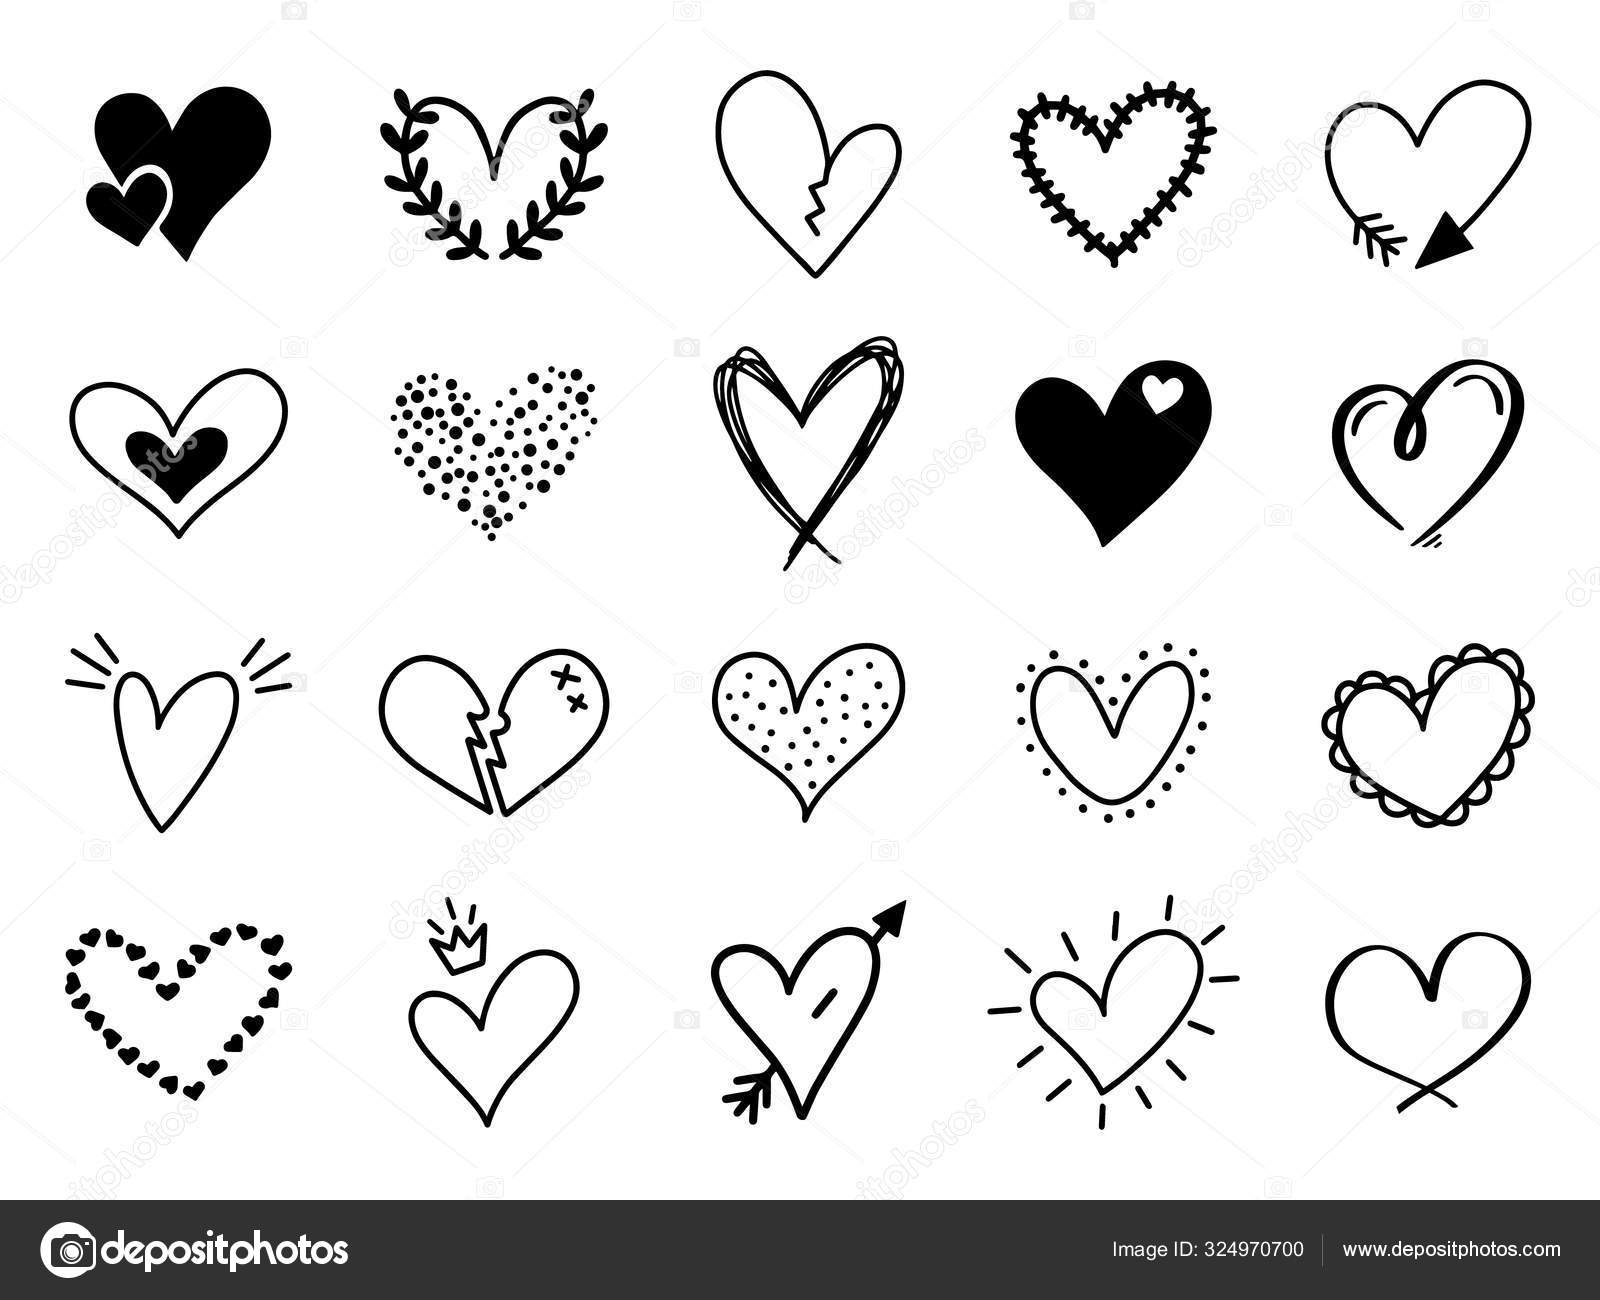 Doodle love heart. Loving cute hand drawn sketched hearts, doodle ...